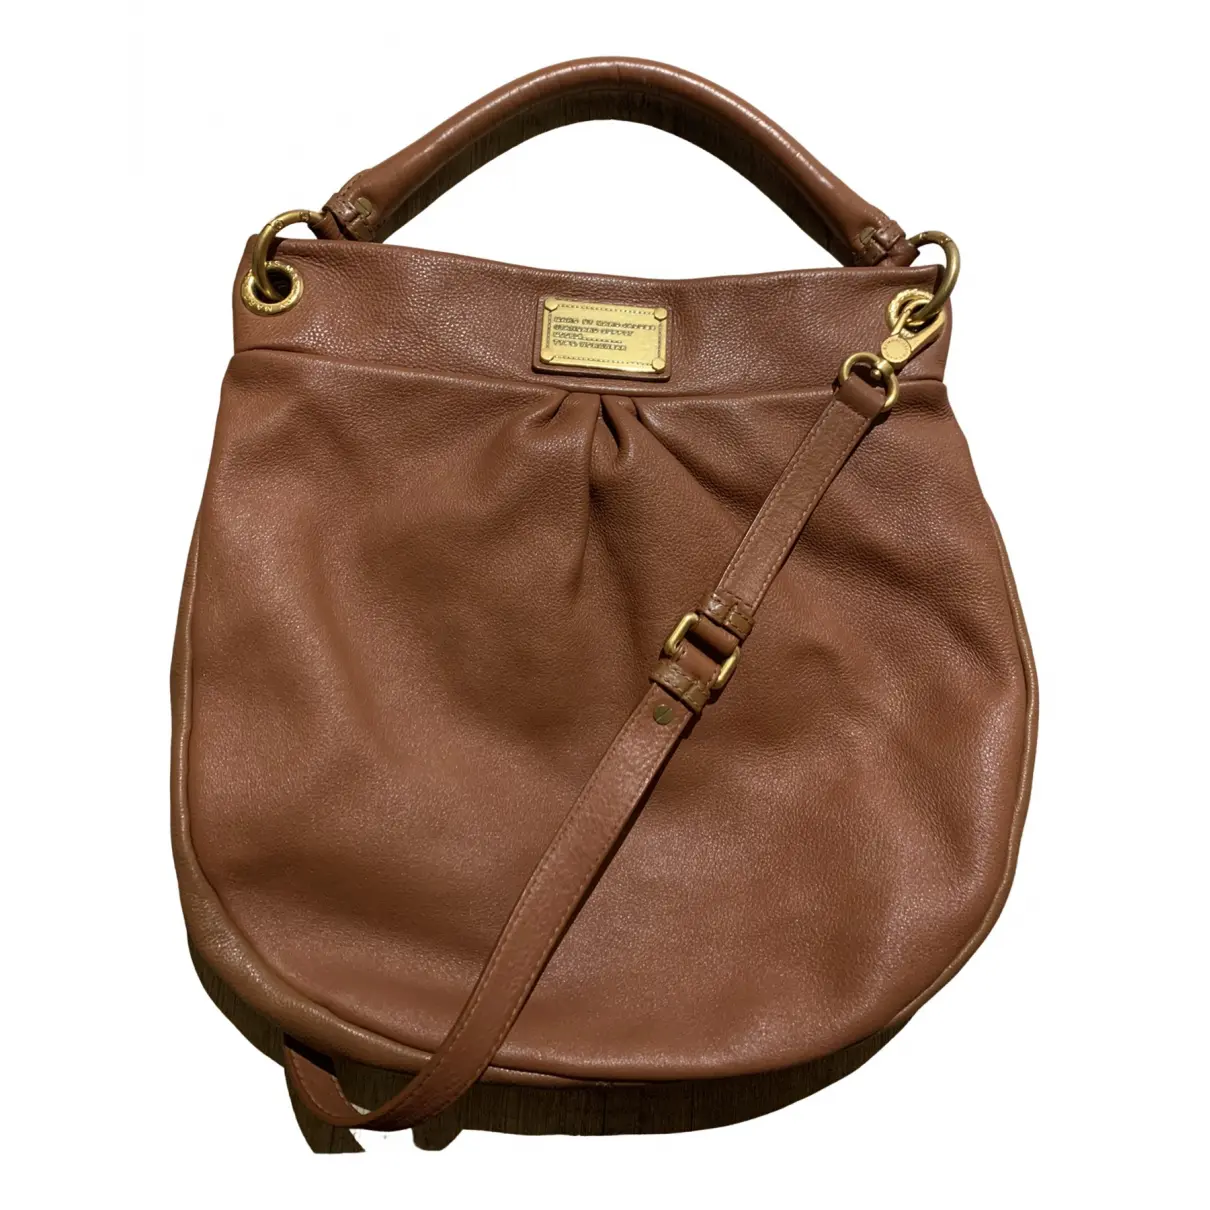 Too Hot to Handle leather crossbody bag Marc by Marc Jacobs